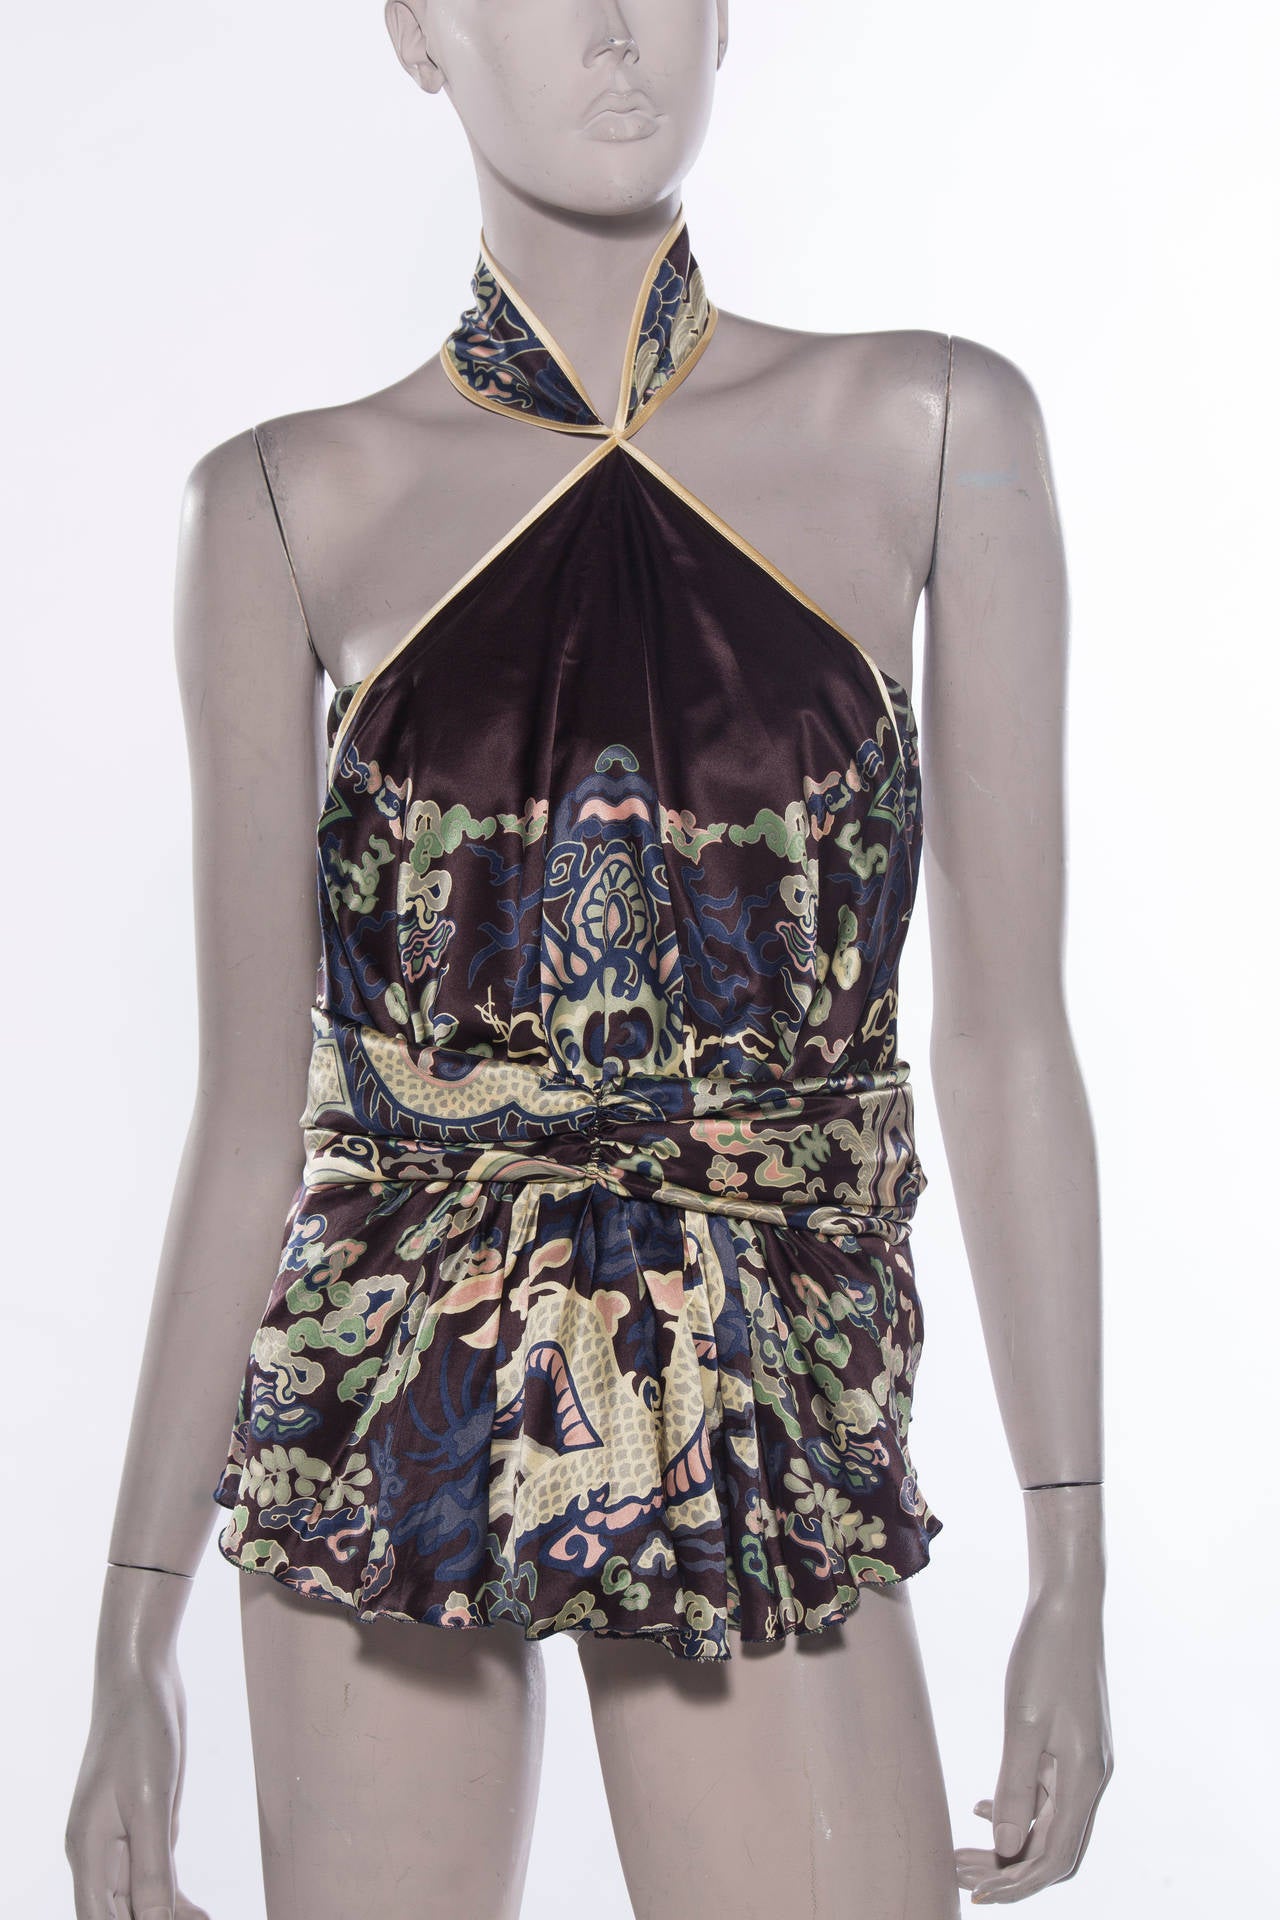 Tom Ford for Yves Saint Laurent, Fall 2004, silk bustier with dragon and floral print throughout, corset interior lining, draped accents throughout, invisible zip closure at center back and fully lined in silk.

Bust 34